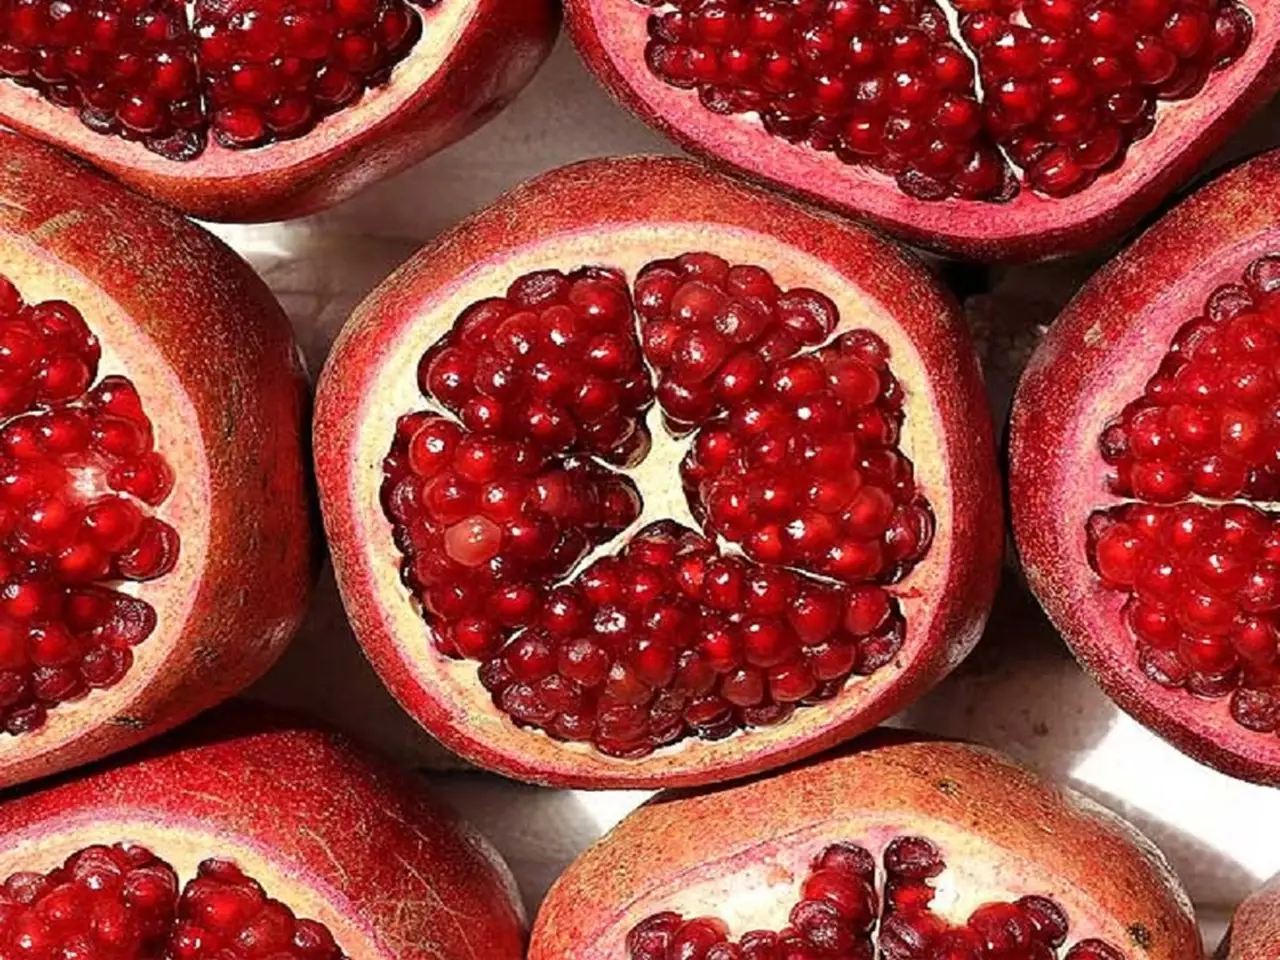 The pomegranate fruit is nutritious and energizing.